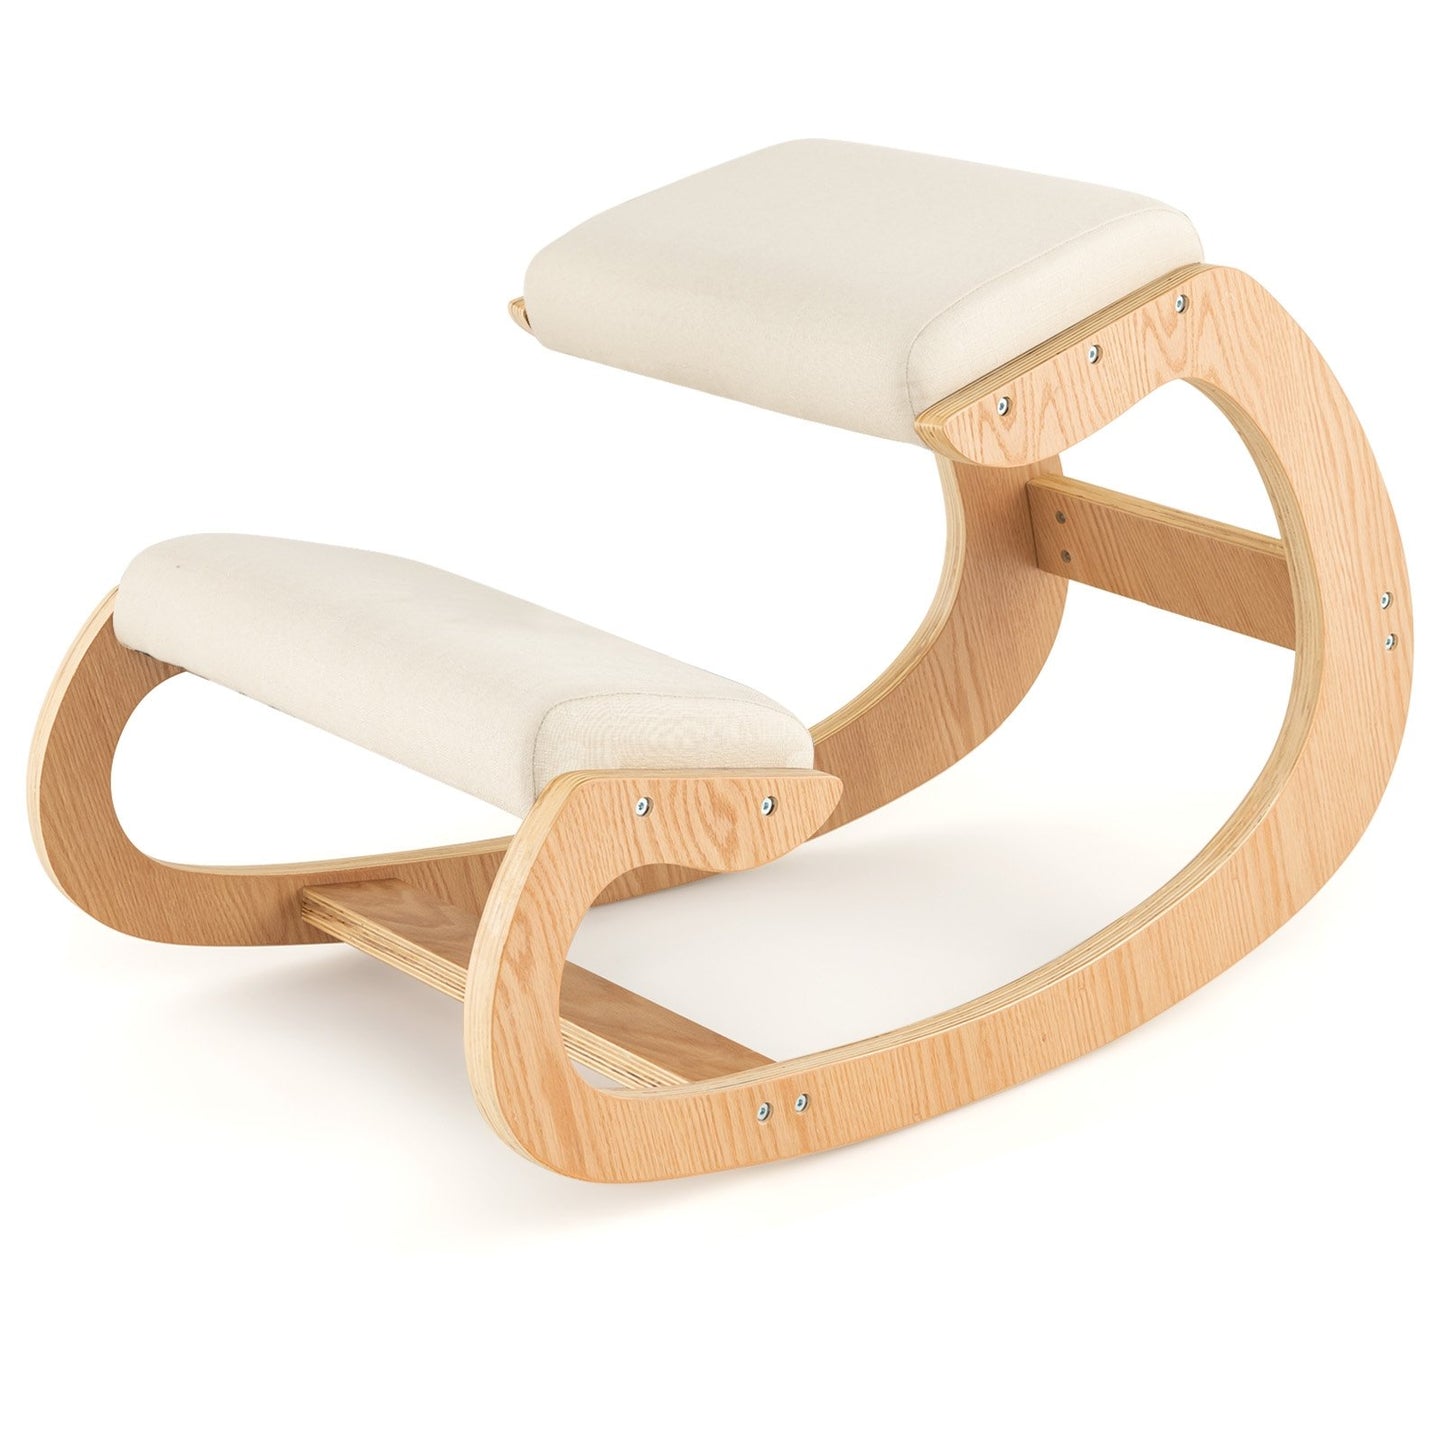 Wooden Rocking Chair with Comfortable Padded Seat Cushion and Knee Support, Beige